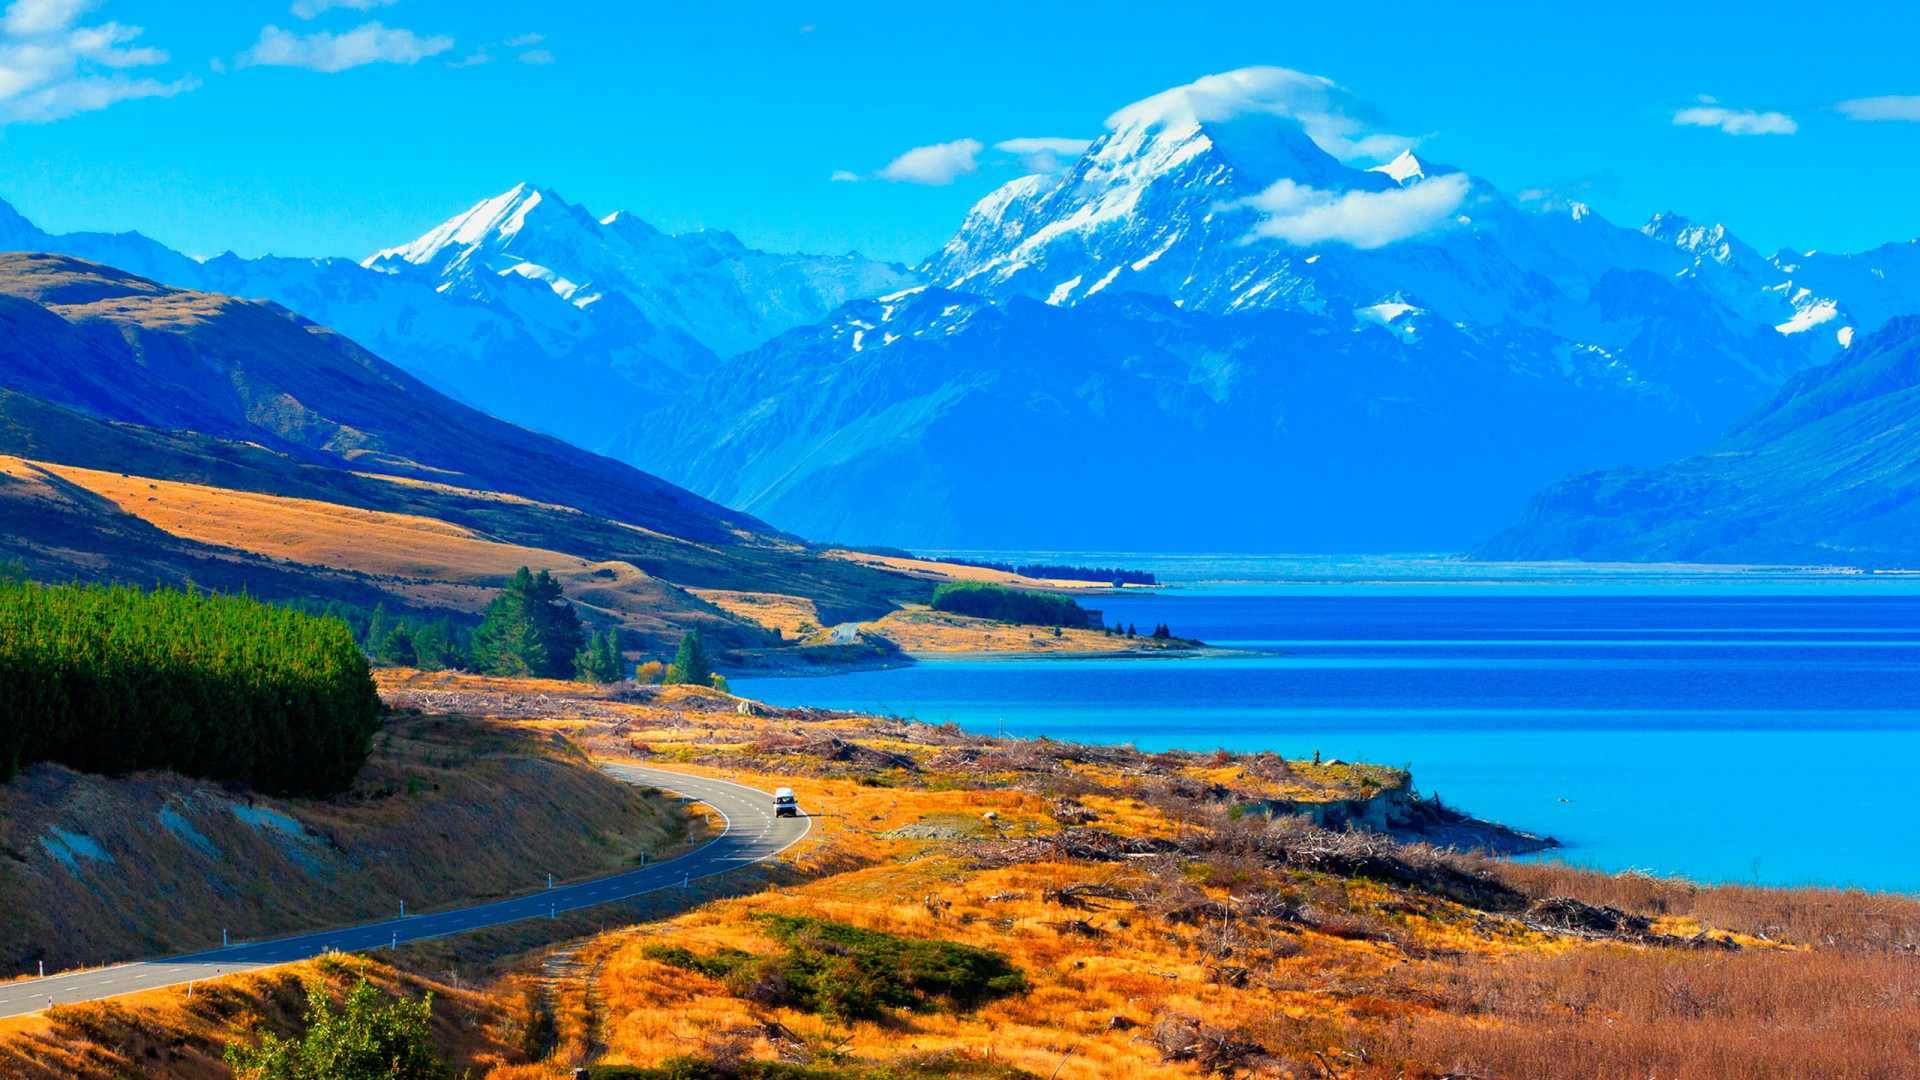 Page 7 | New Zealand Wallpaper Images - Free Download on Freepik